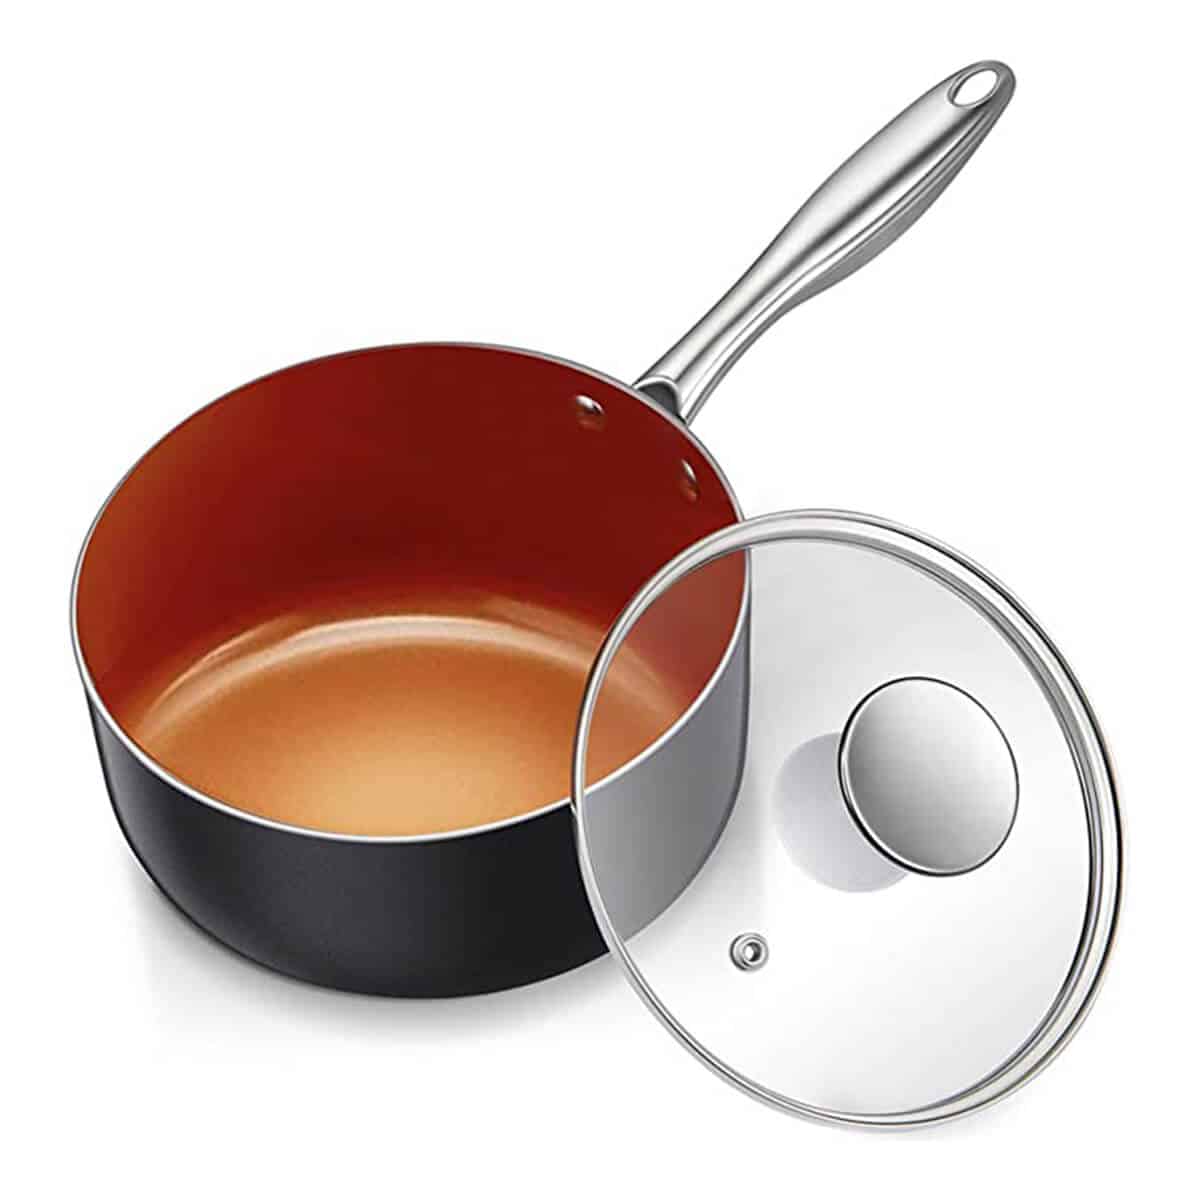 our favorite Ultra Nonstick Copper small Sauce Pan with Lid.